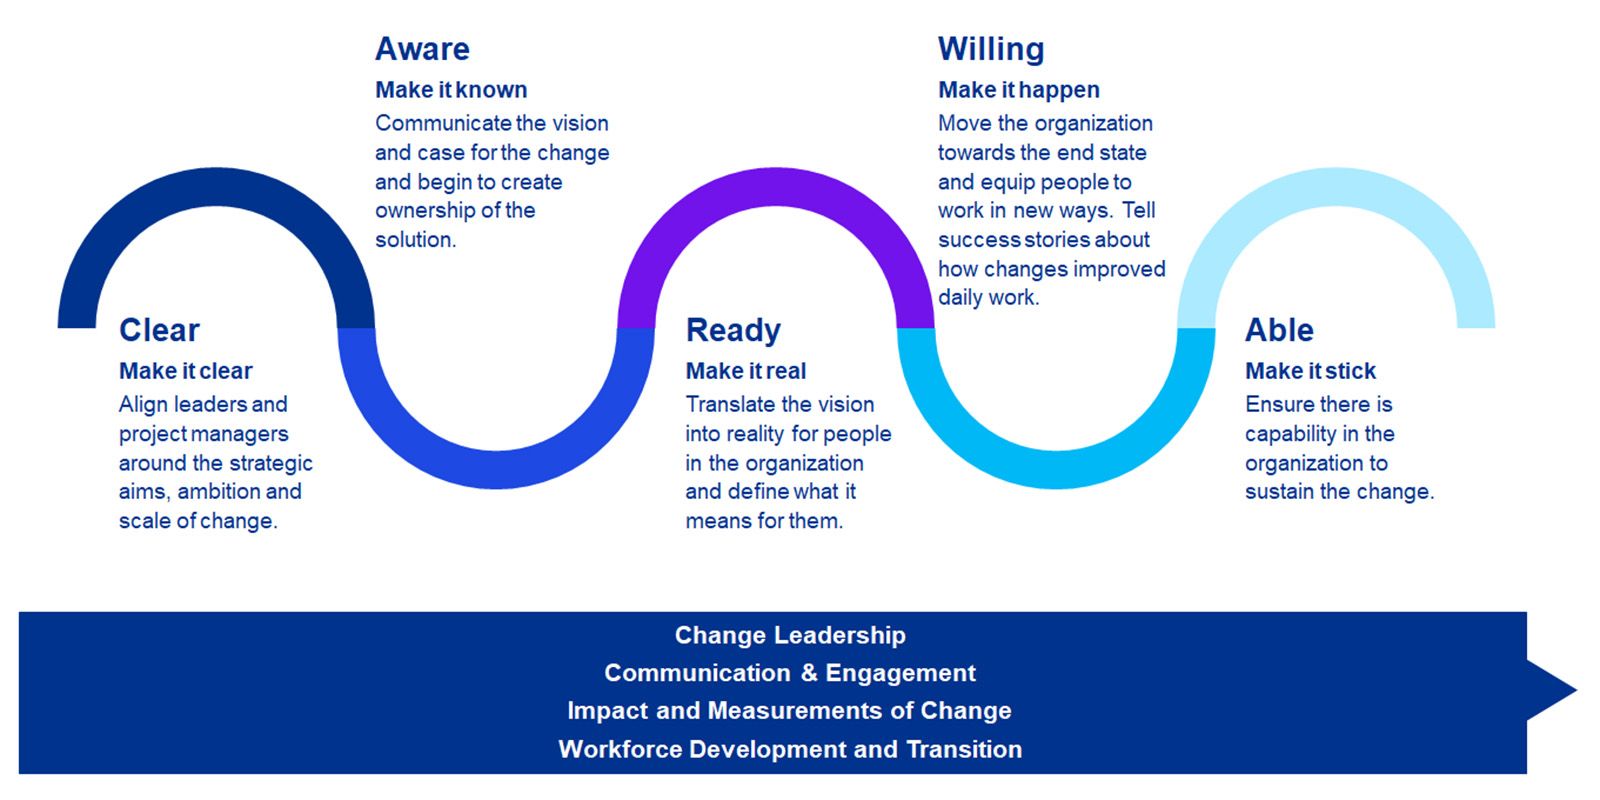 Our Approach to Change Management